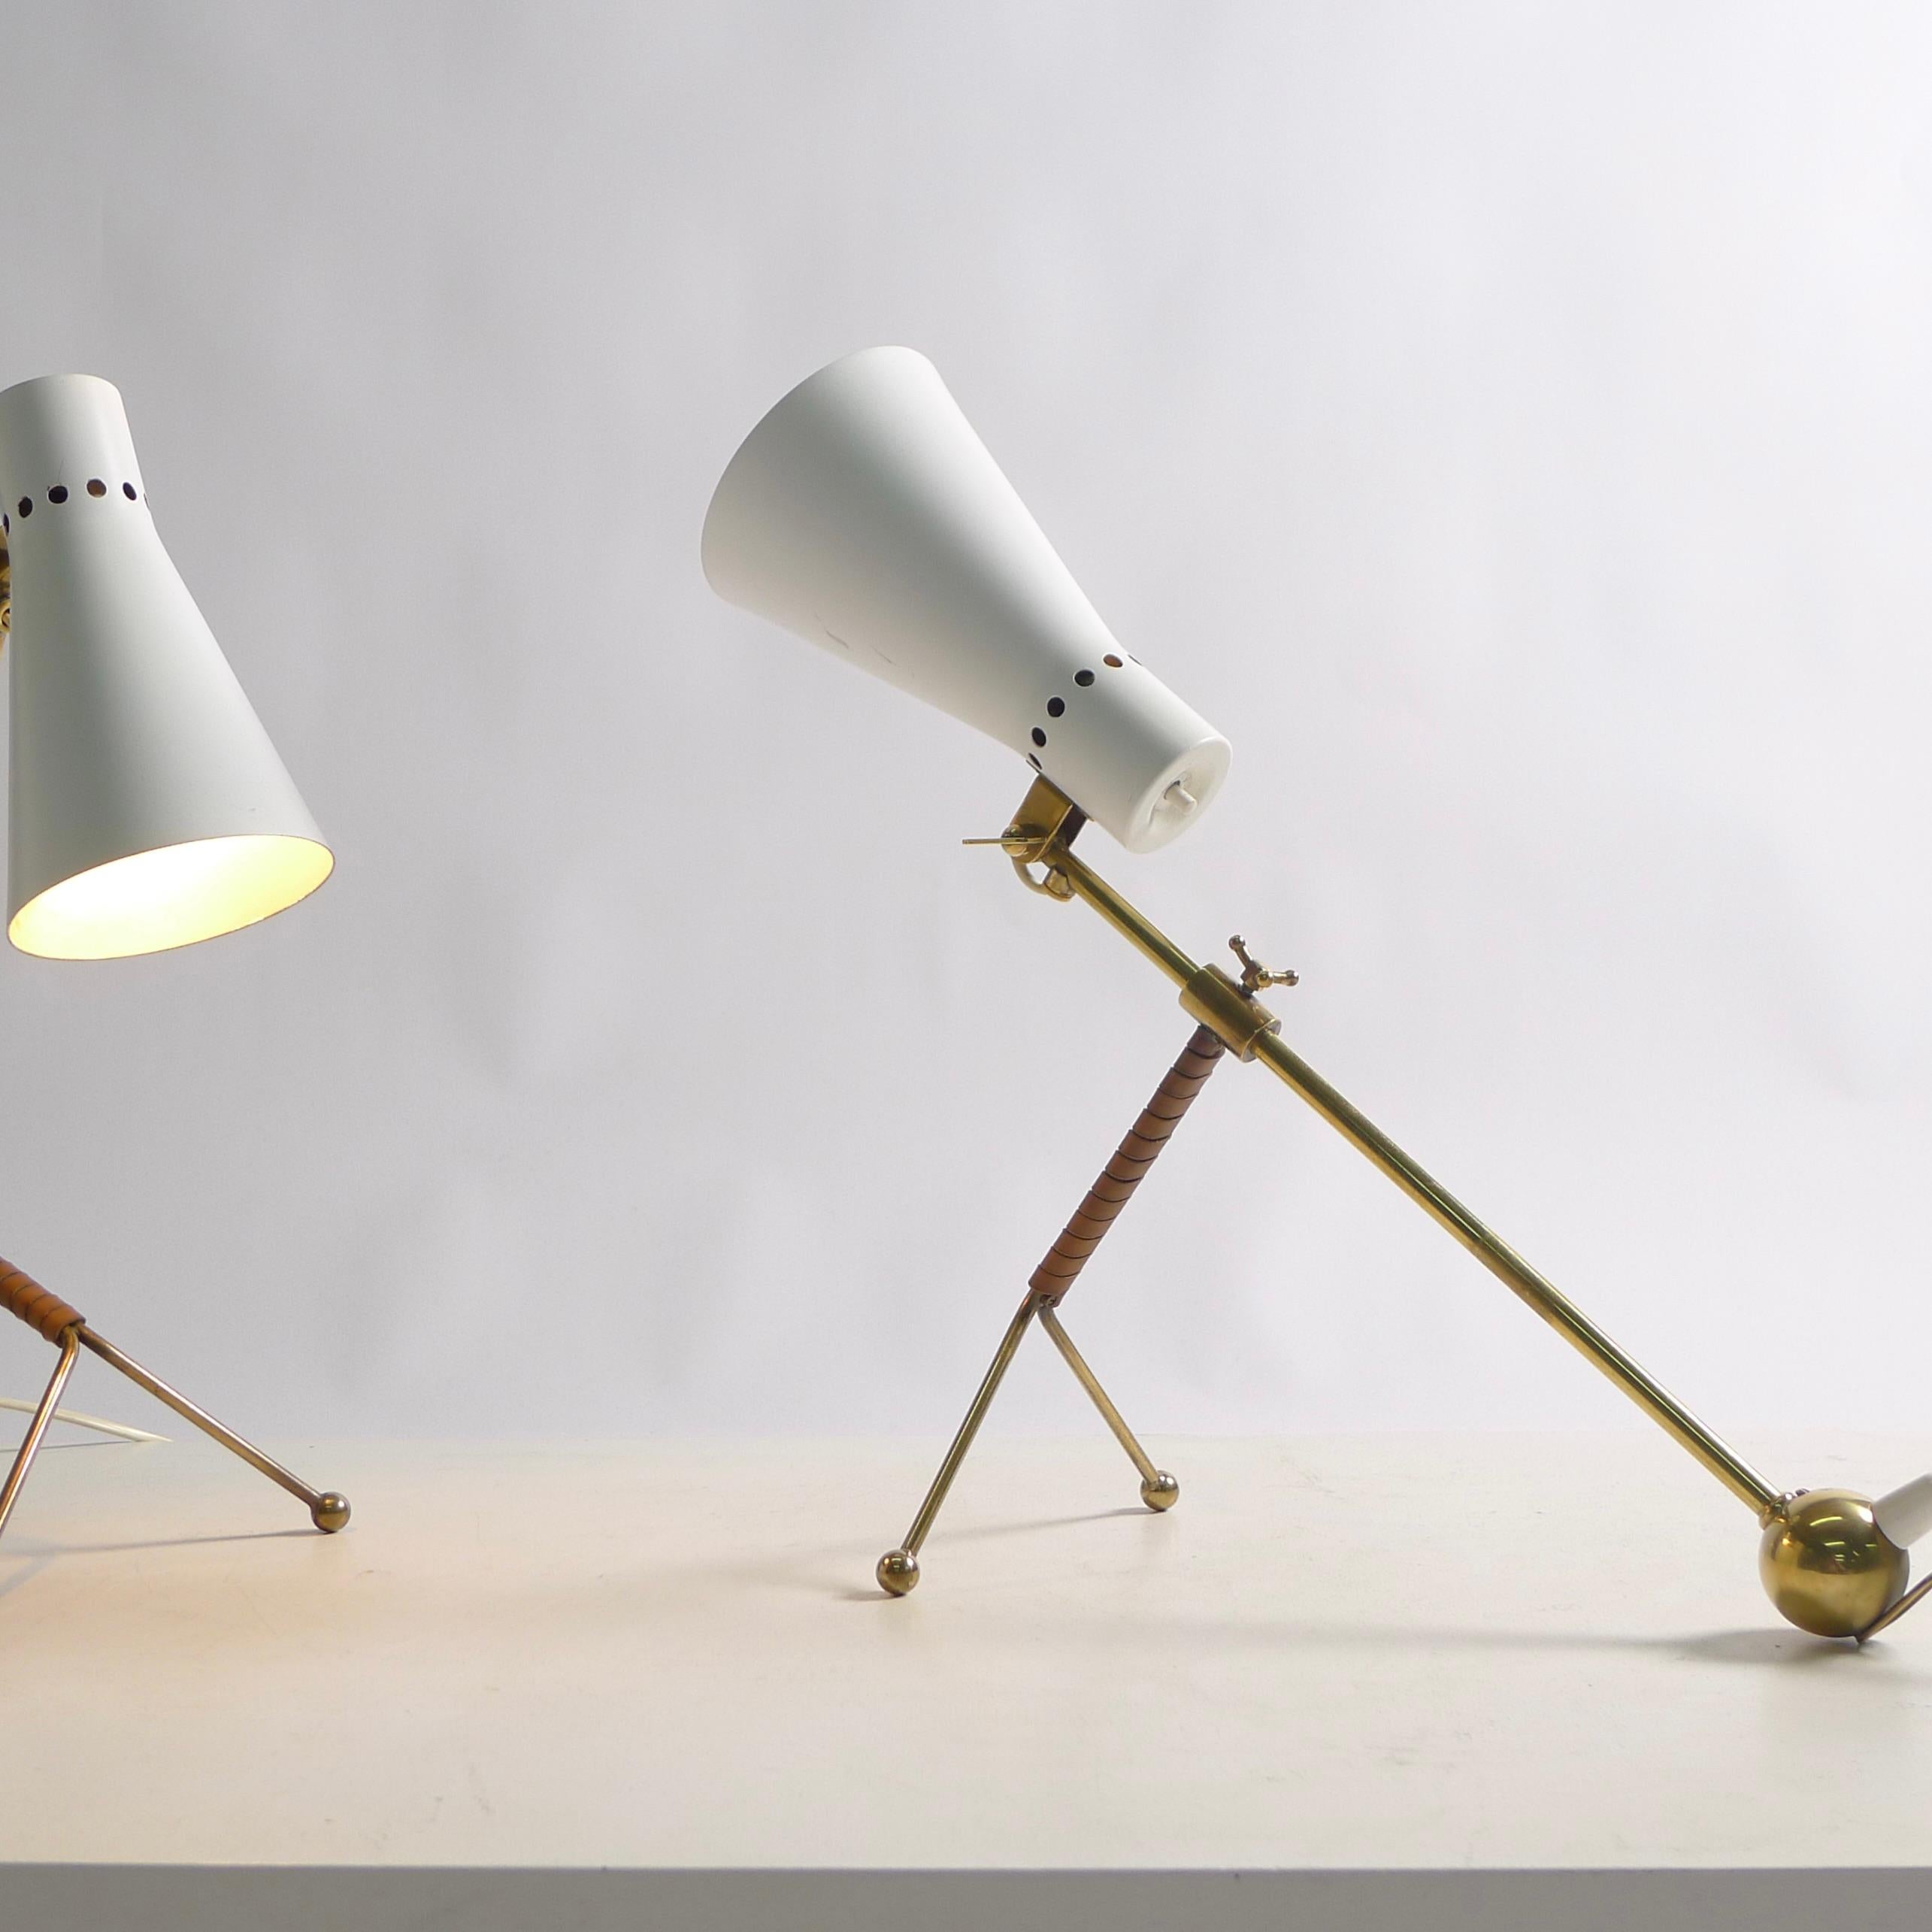 Tapio Wirkkala K11-16 desk or table light, fully adjustable, designed 1954 and made by Idman, Finland

Brass, leather and enamelled steel

There are two lamps available - the price is per lamp

The lamps are stamped Idman to the upper lever,